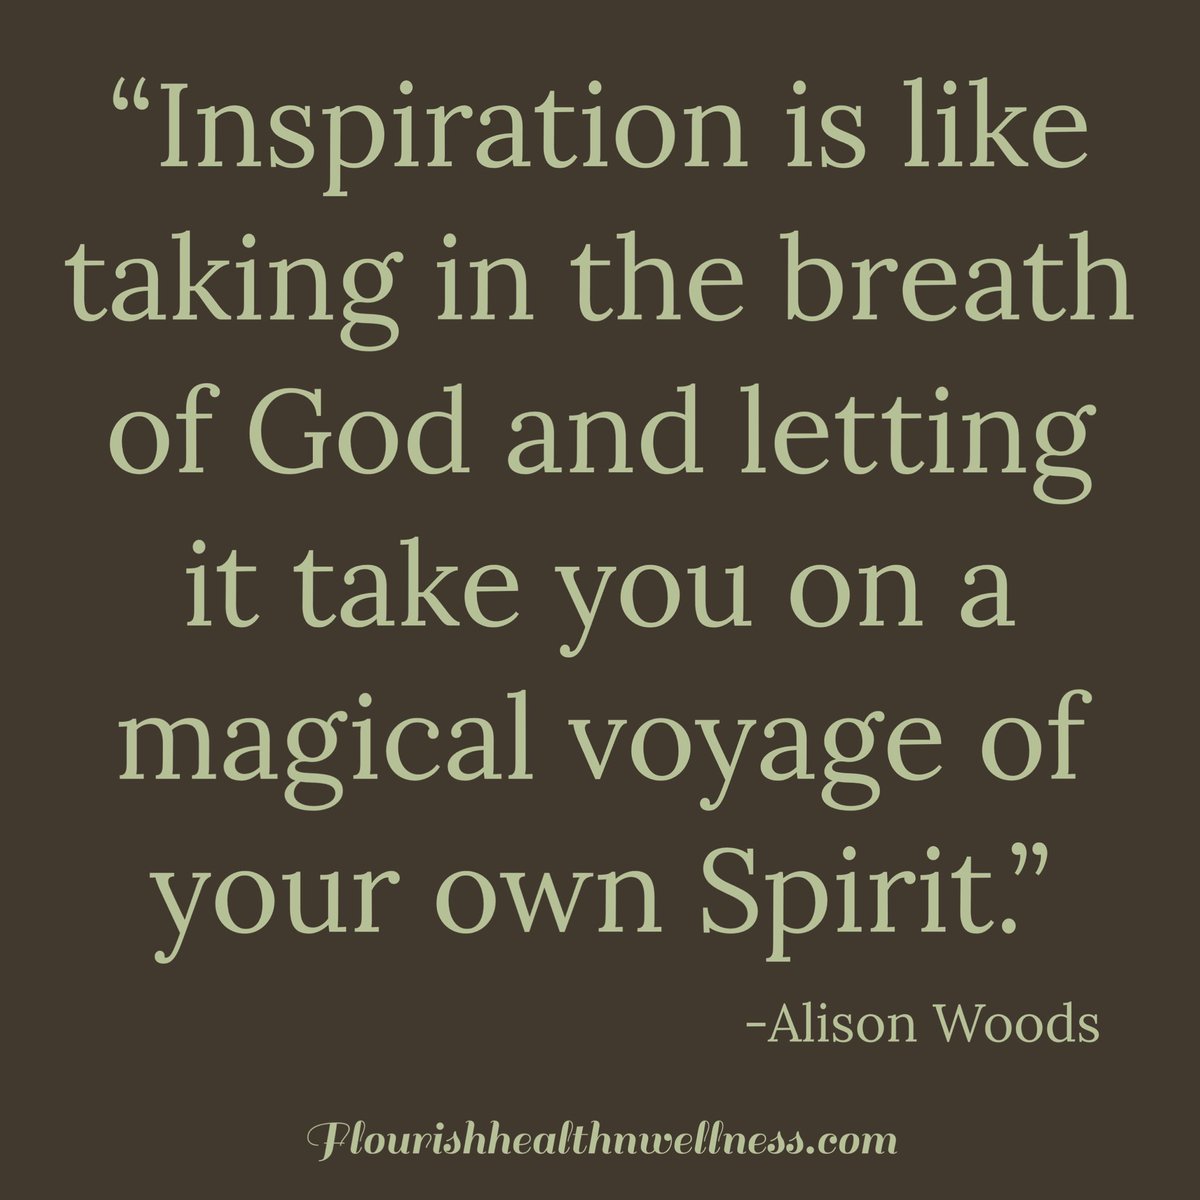 “Inspiration is like taking in the breath of God and letting it take you on a magical voyage of your own Spirit.” #inspiration #channelledmessage #messagesfromspirit #higherconsciousness #beinspired #psychicmedium #intuition #selfdiscovery #Awareness #presence